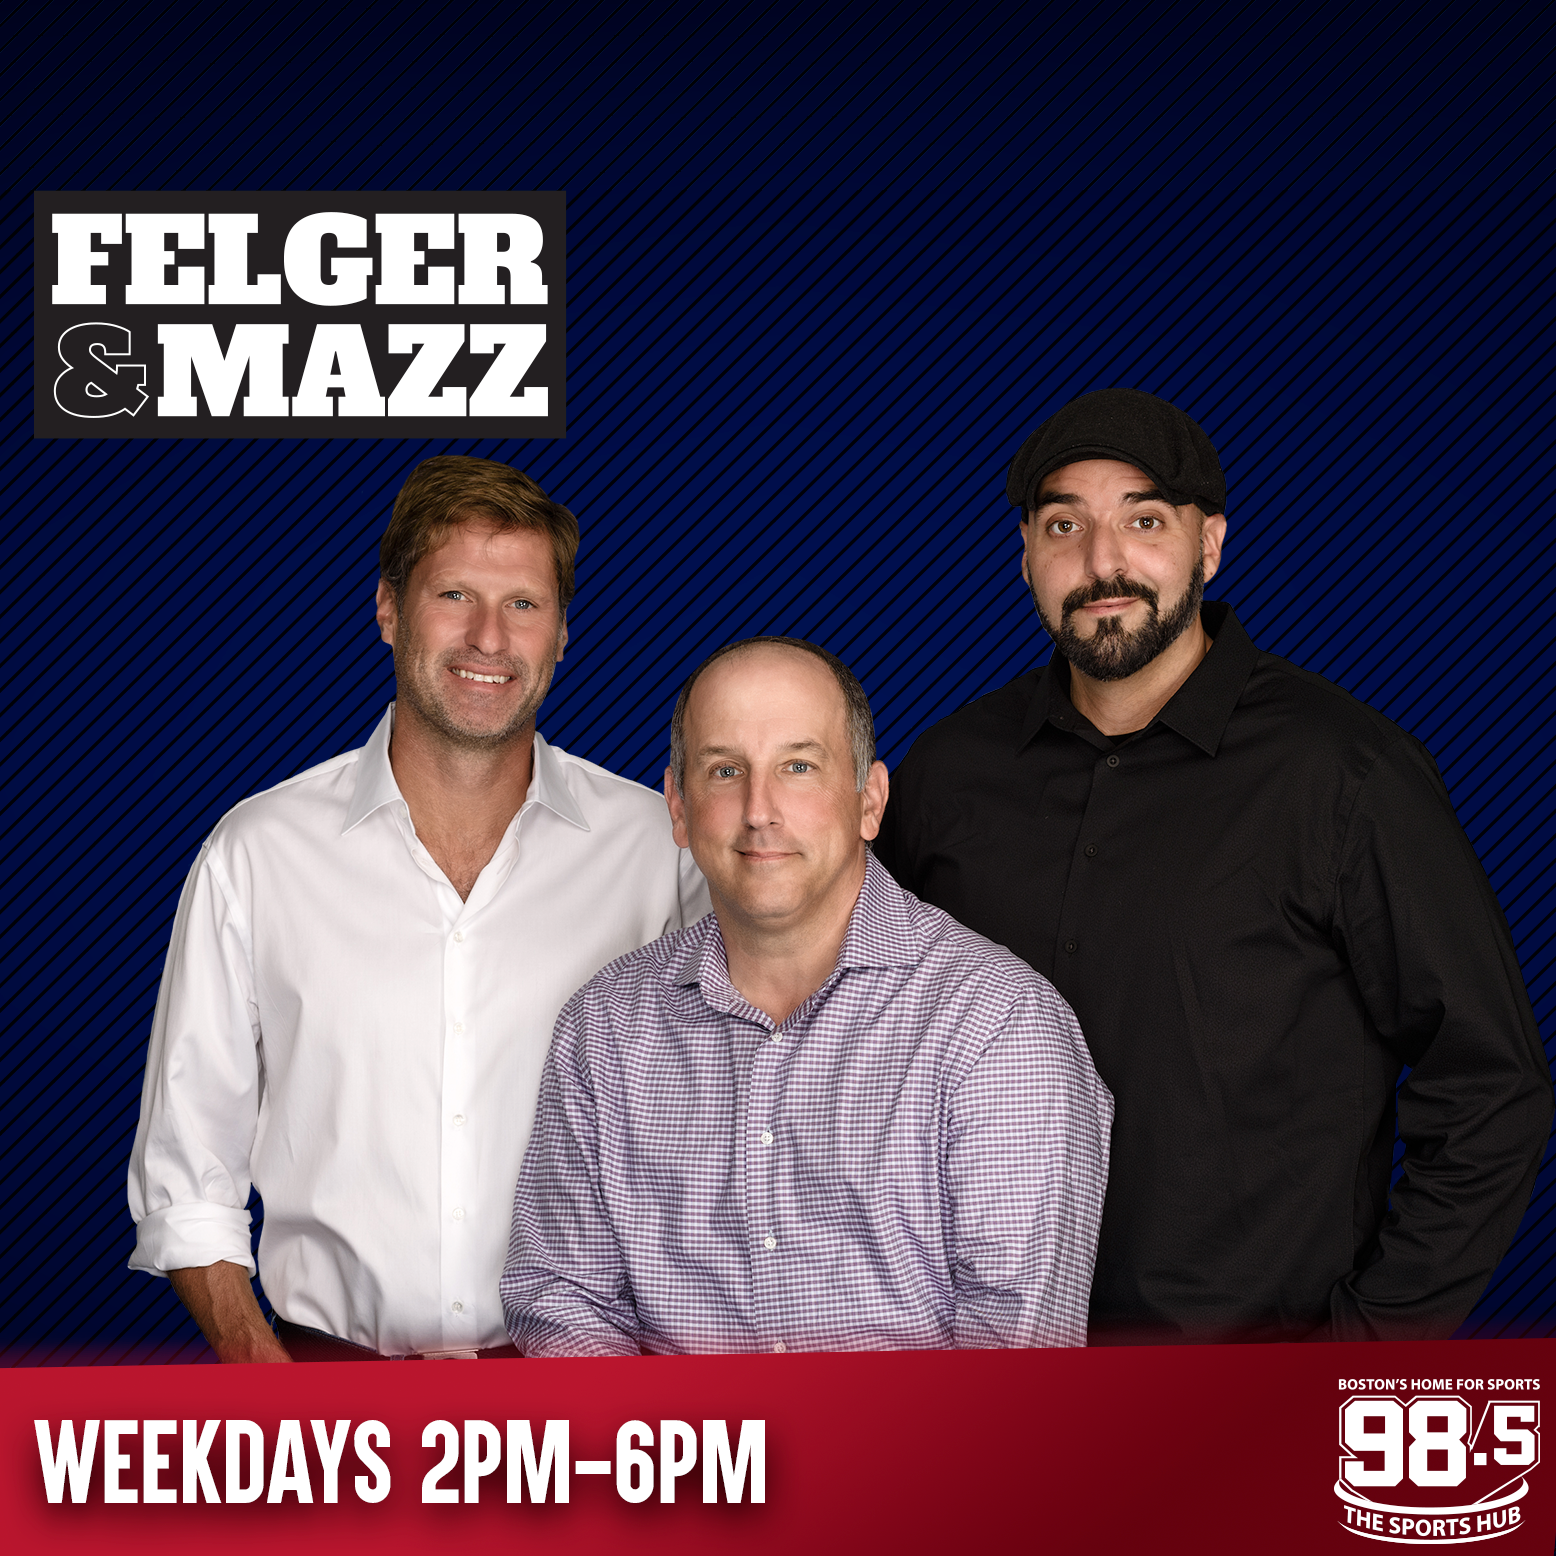 Agenda Free Friday // Richard Seymour Elected to Hall of Fame // LeGarrette Blount joins the show  - 2/11 (Hour 1)